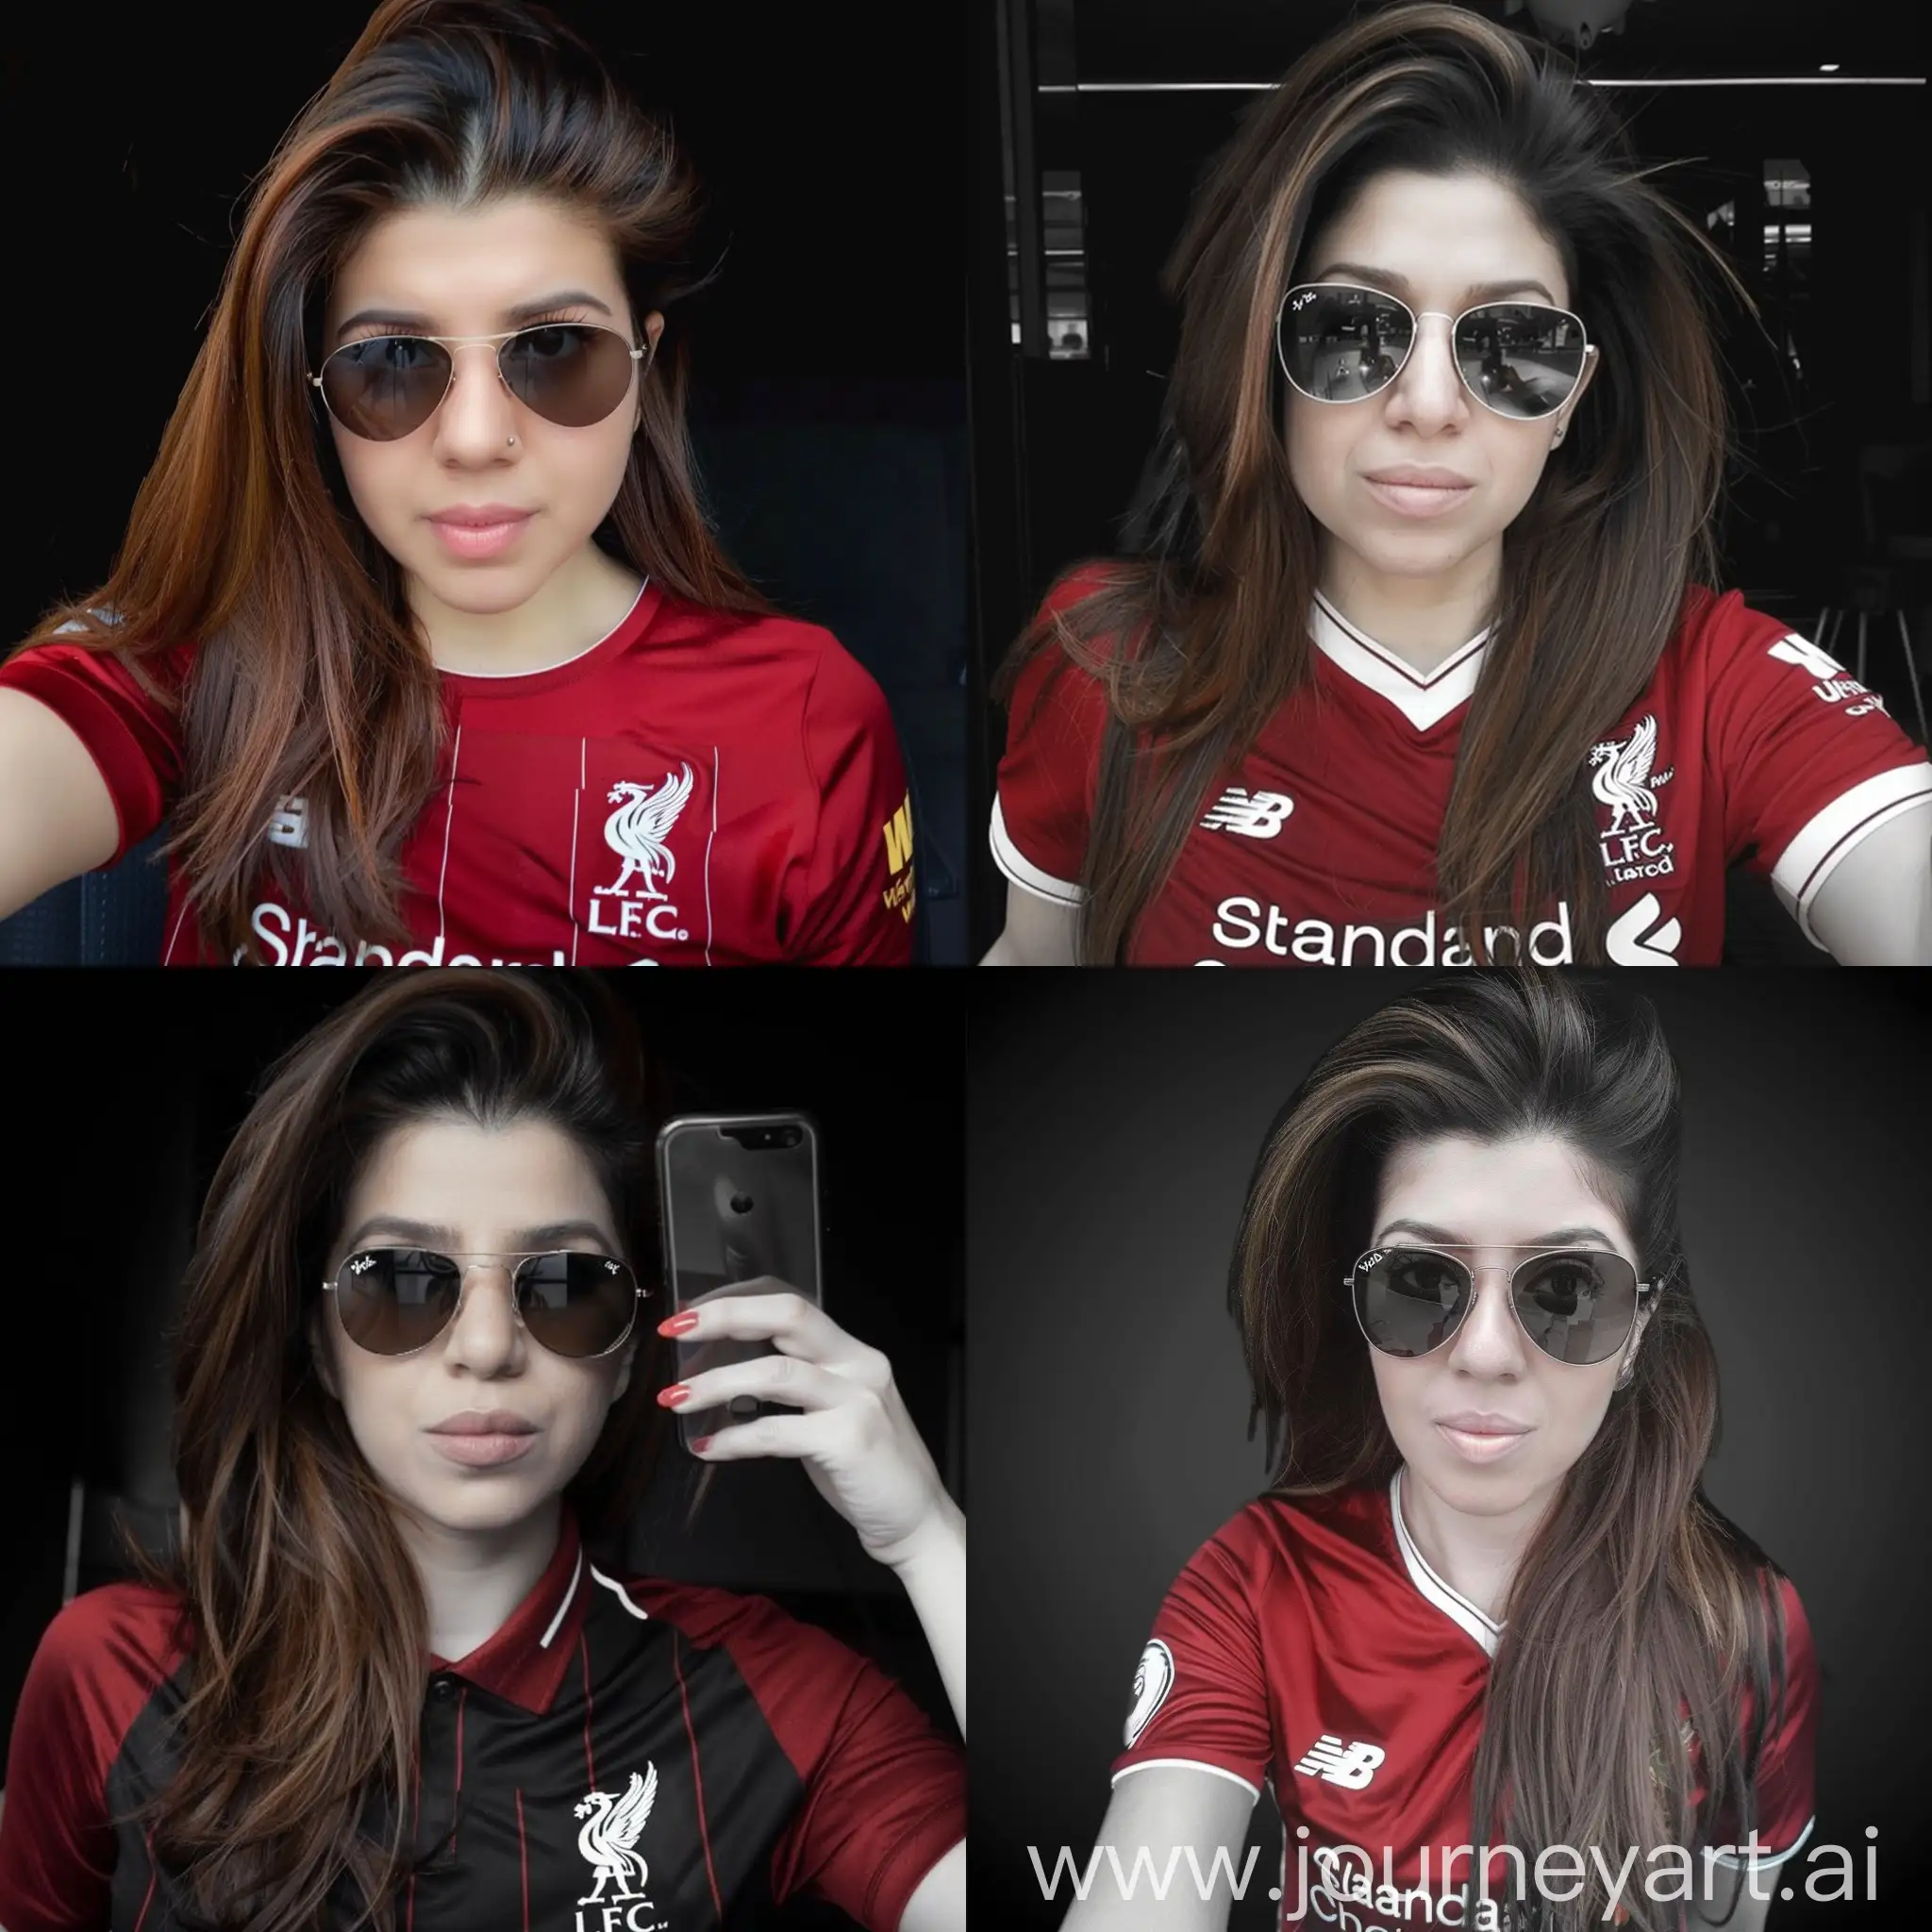 https://cdn.theorg.com/35b5752c-0e0a-4095-869d-88ac40d6735b_thumb.jpg Dela Rostami with long hair, round nose,wearing sunglasses and liverpool fc jersey is taking a selfie